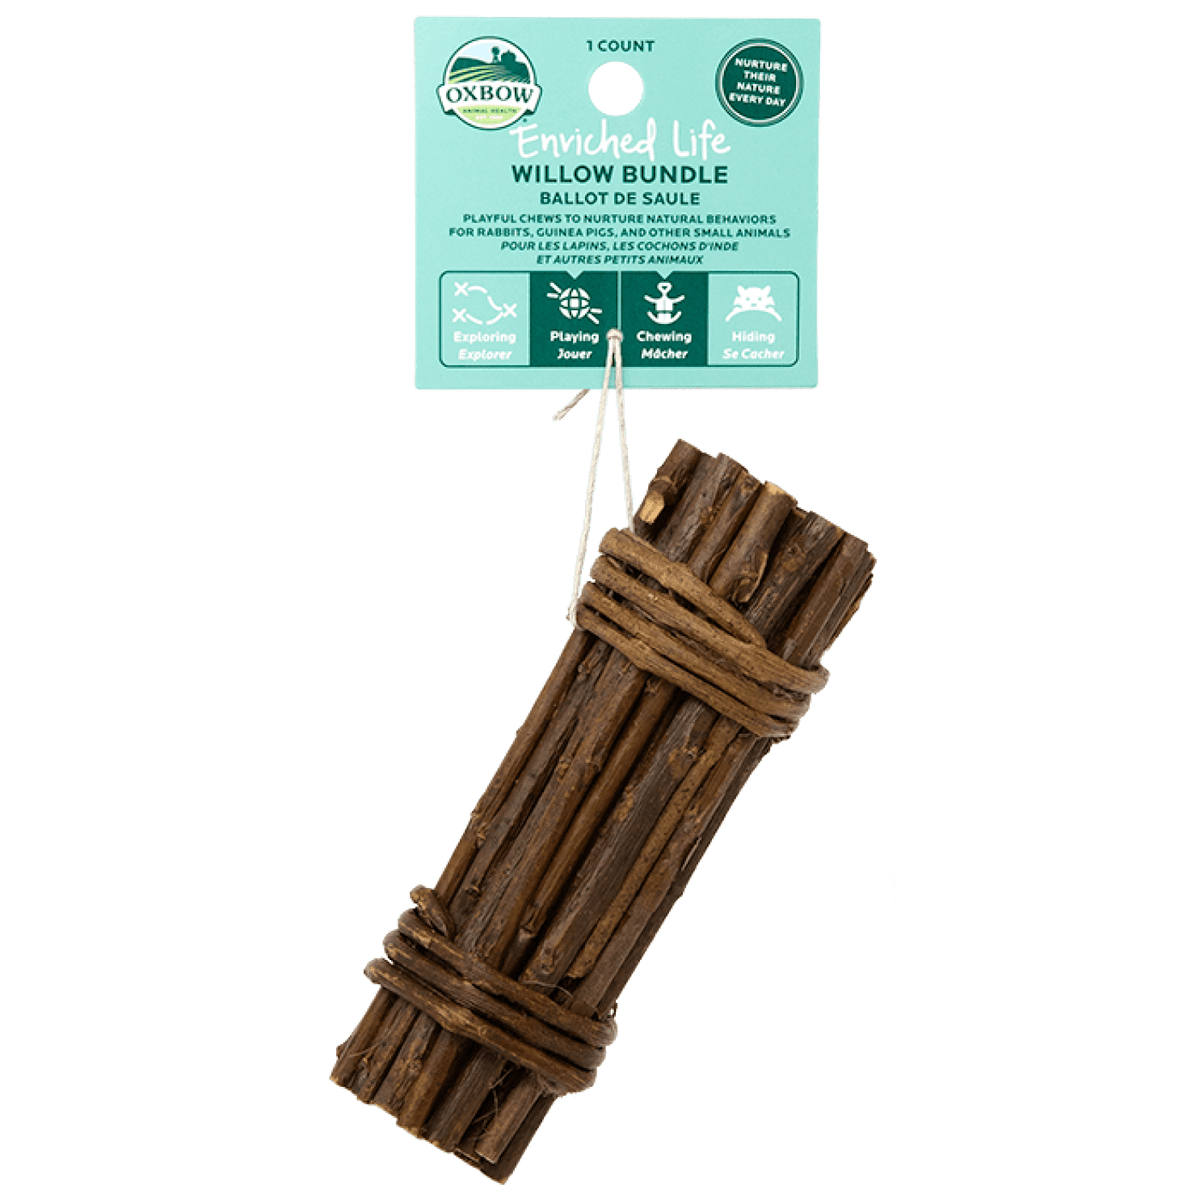 Oxbow Enriched Life Chew Treat - Willow Bundle